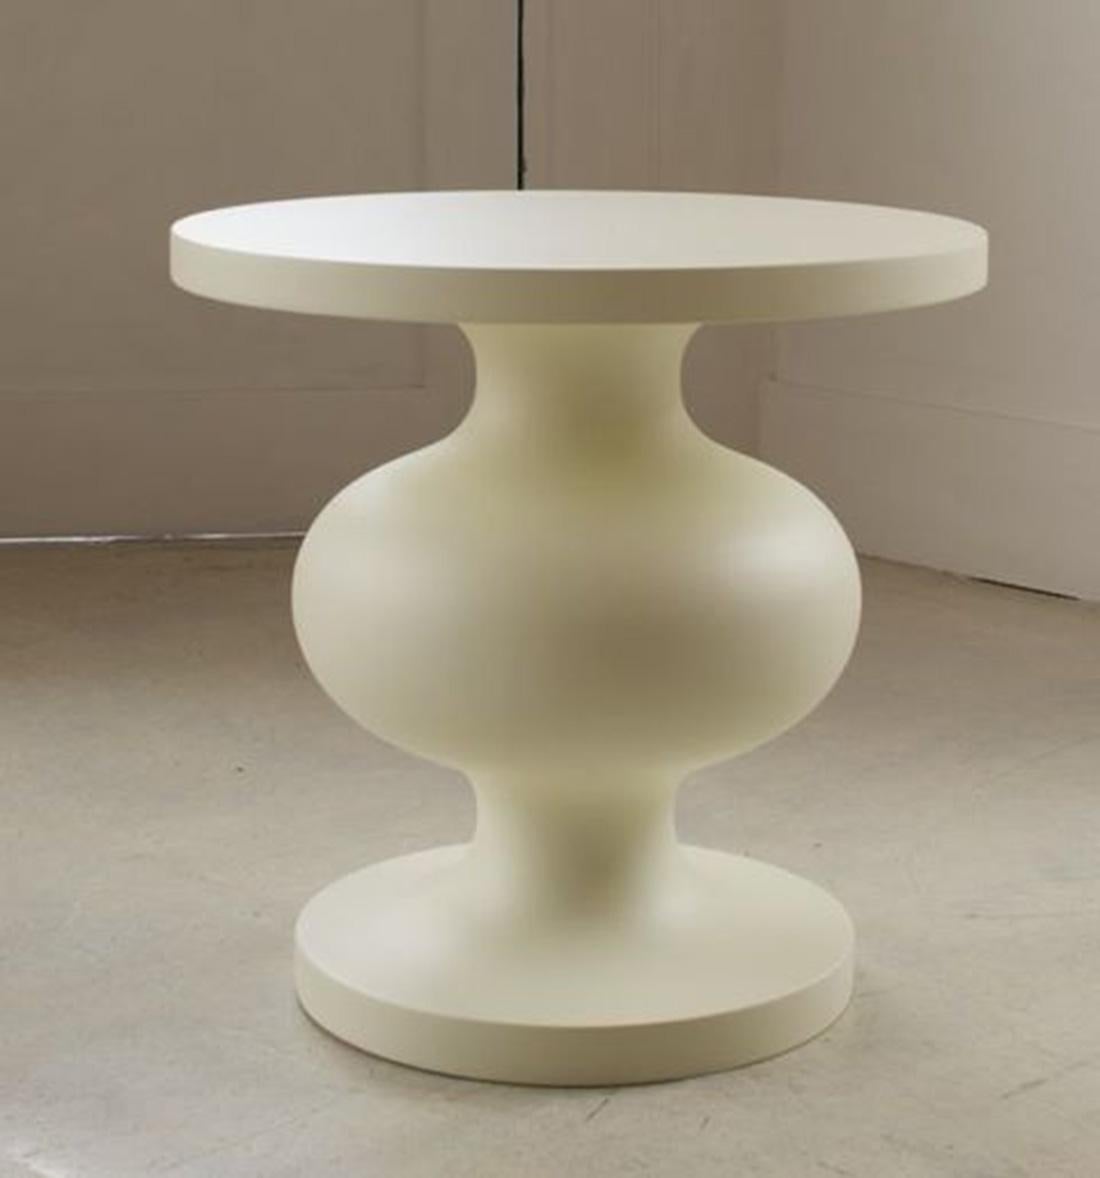 This original sculptural, artisanal Frank side table is a refined example of 21st century organic modern design. Its signature sensuous shape and perfect proportions are reminiscent of Jean Arp’s minimal 20th century sculptures. 
Frank Side Table